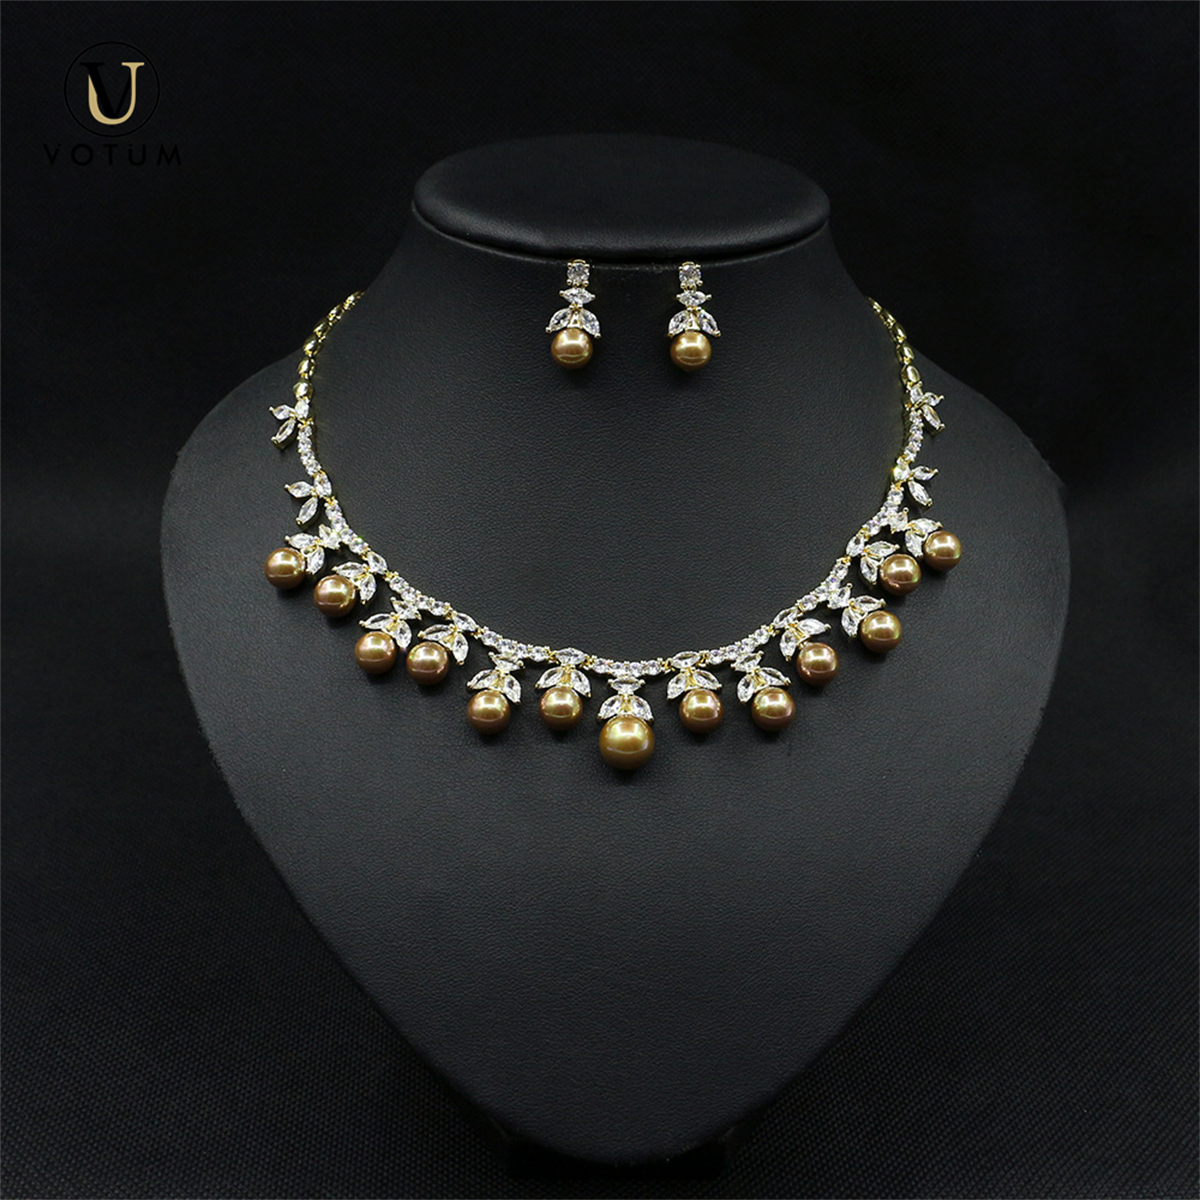 Votum OEM Fashion Gold Plated Freshwater Pearl Moissanite Diamond s925 Sterling Silver Necklace Earring Jewelry Set Luxury Jewellery